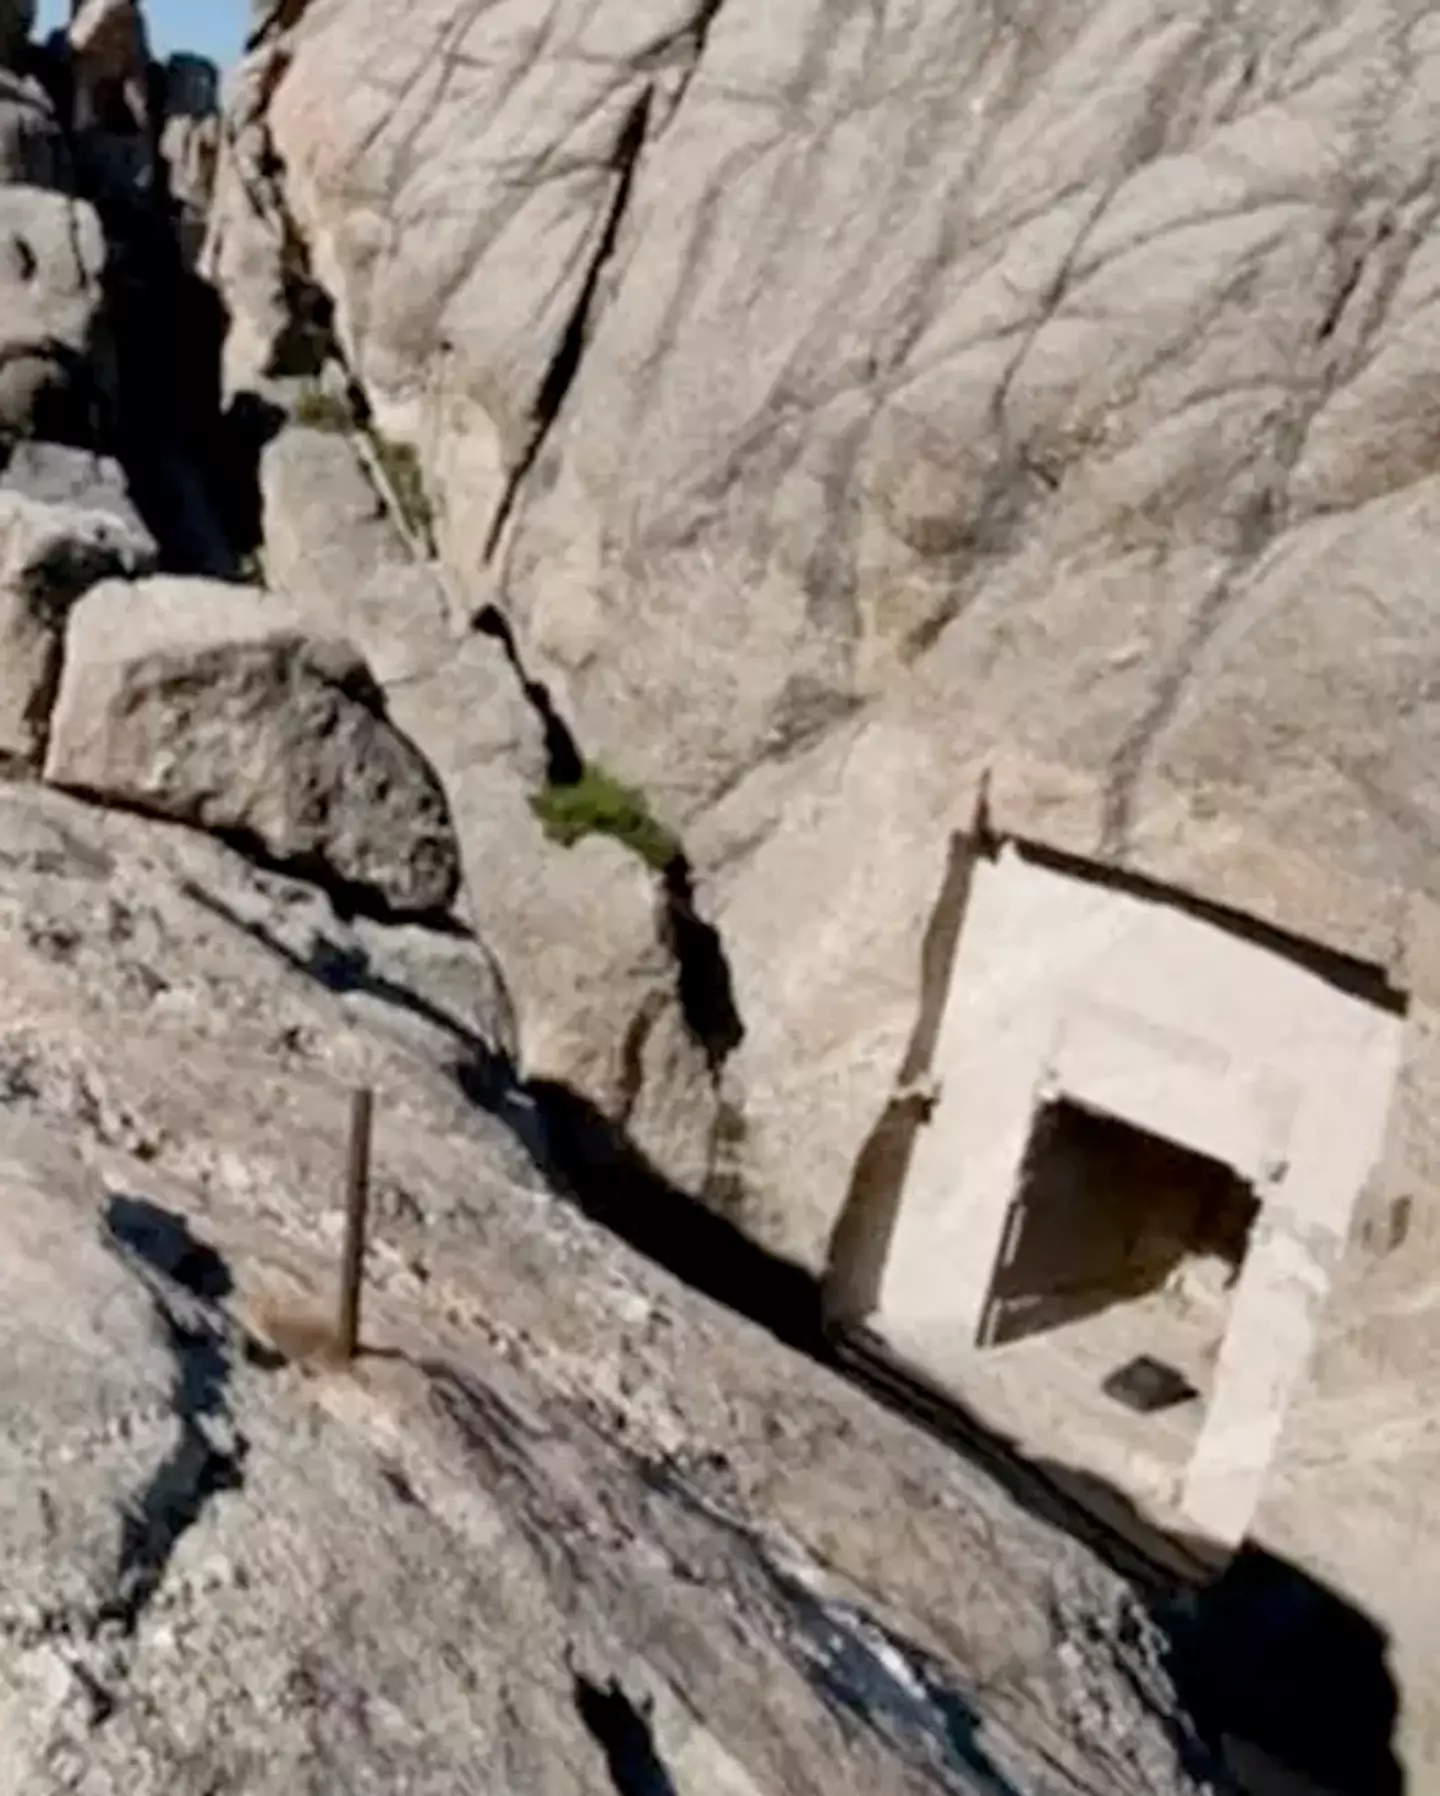 The sculptor behind Mount Rushmore had big plans for the secret passageway.